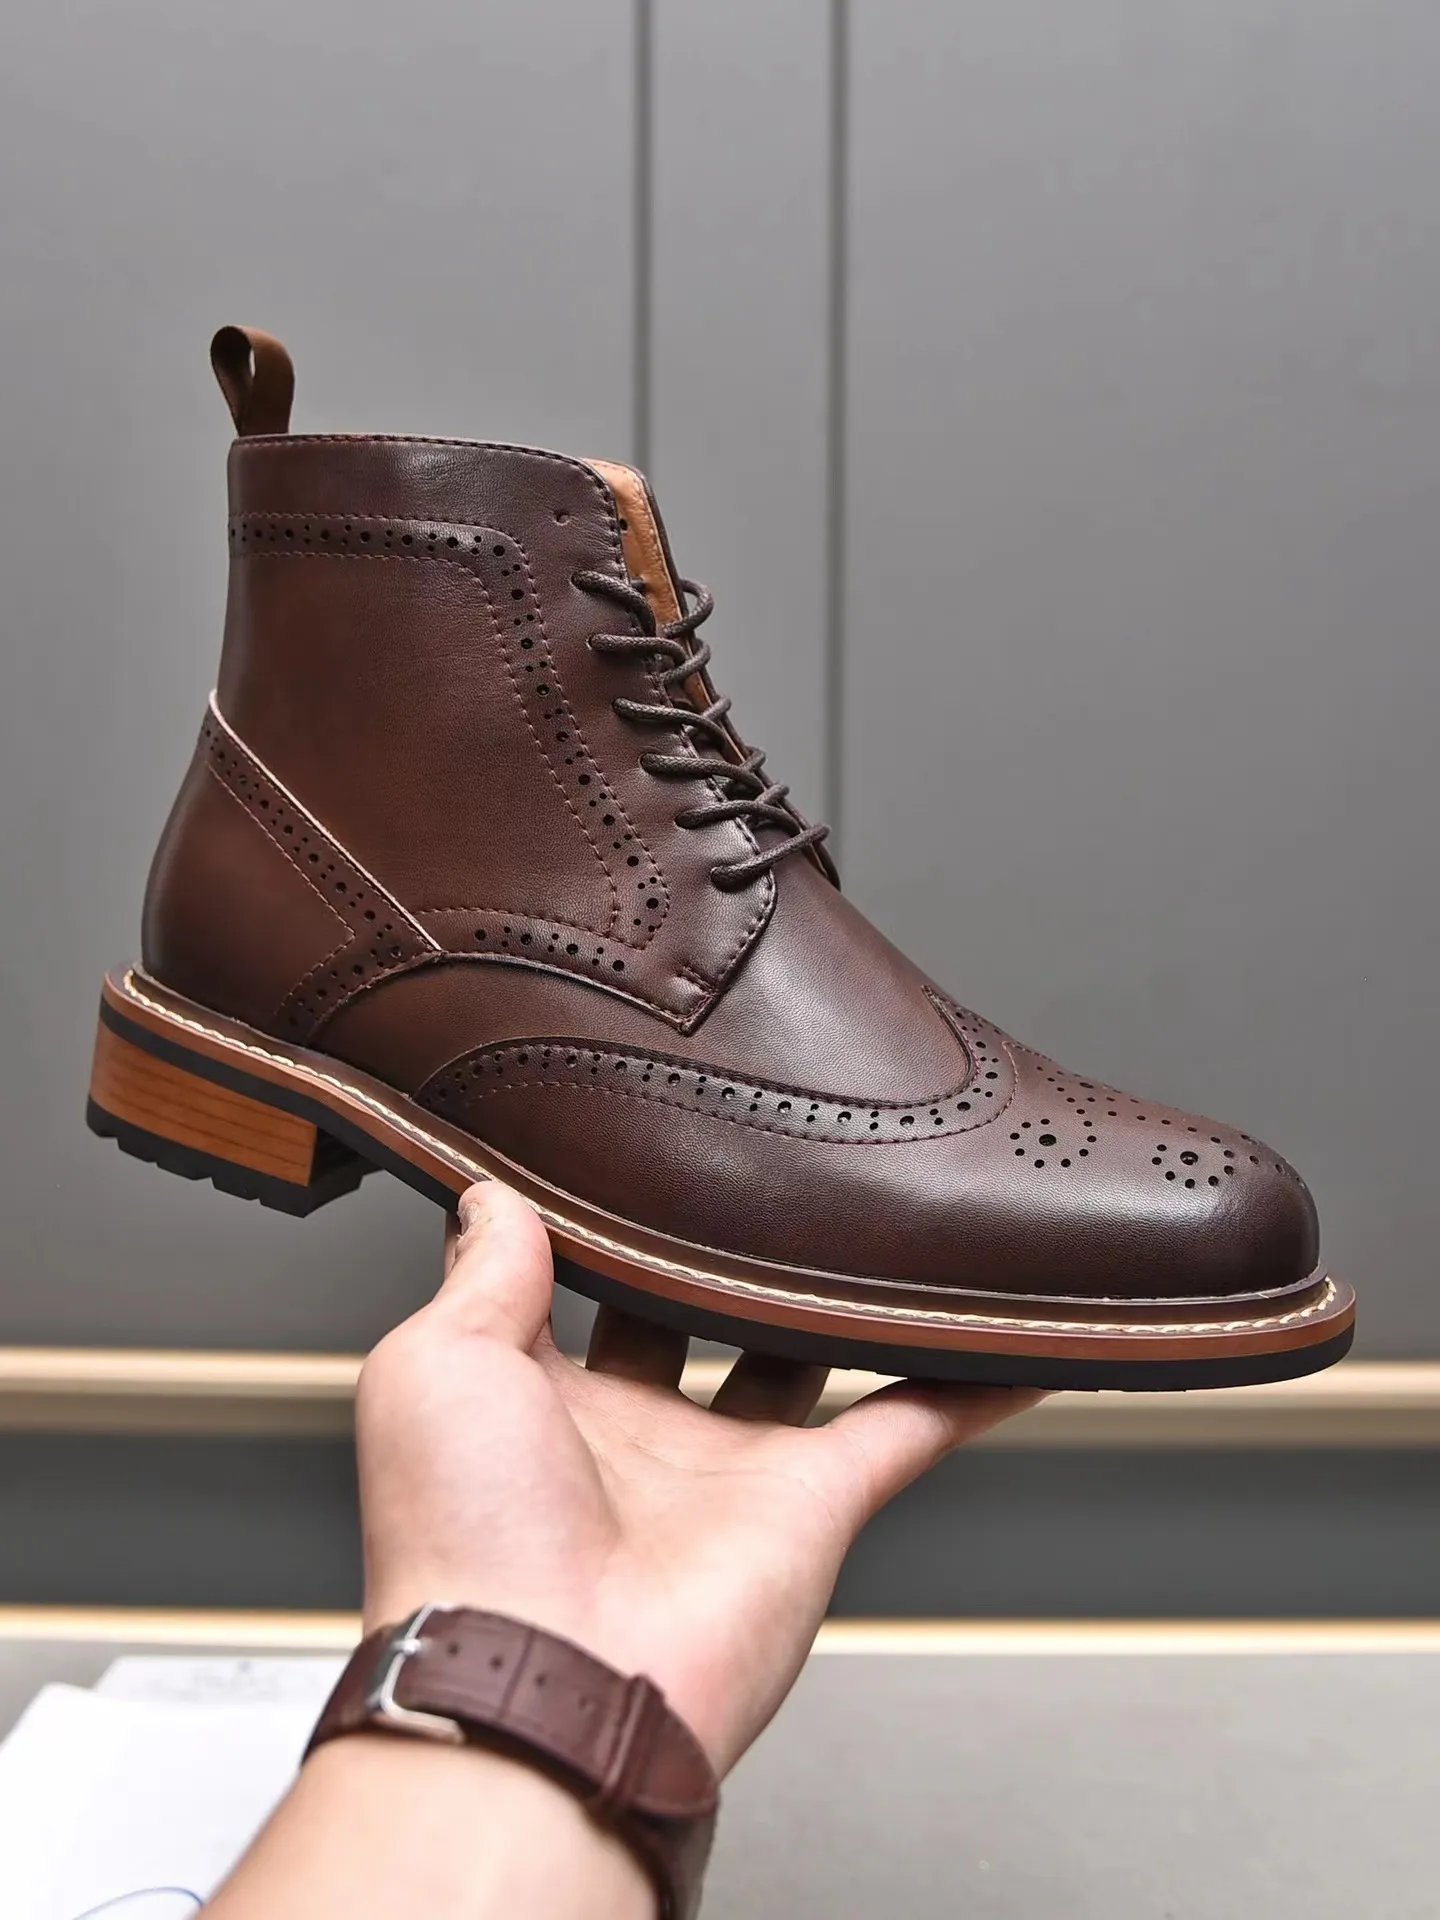 Block Men's Boots Casual Business ChelseaBoots Designer Luxury Carved LeatherBoots British Leather Shoes